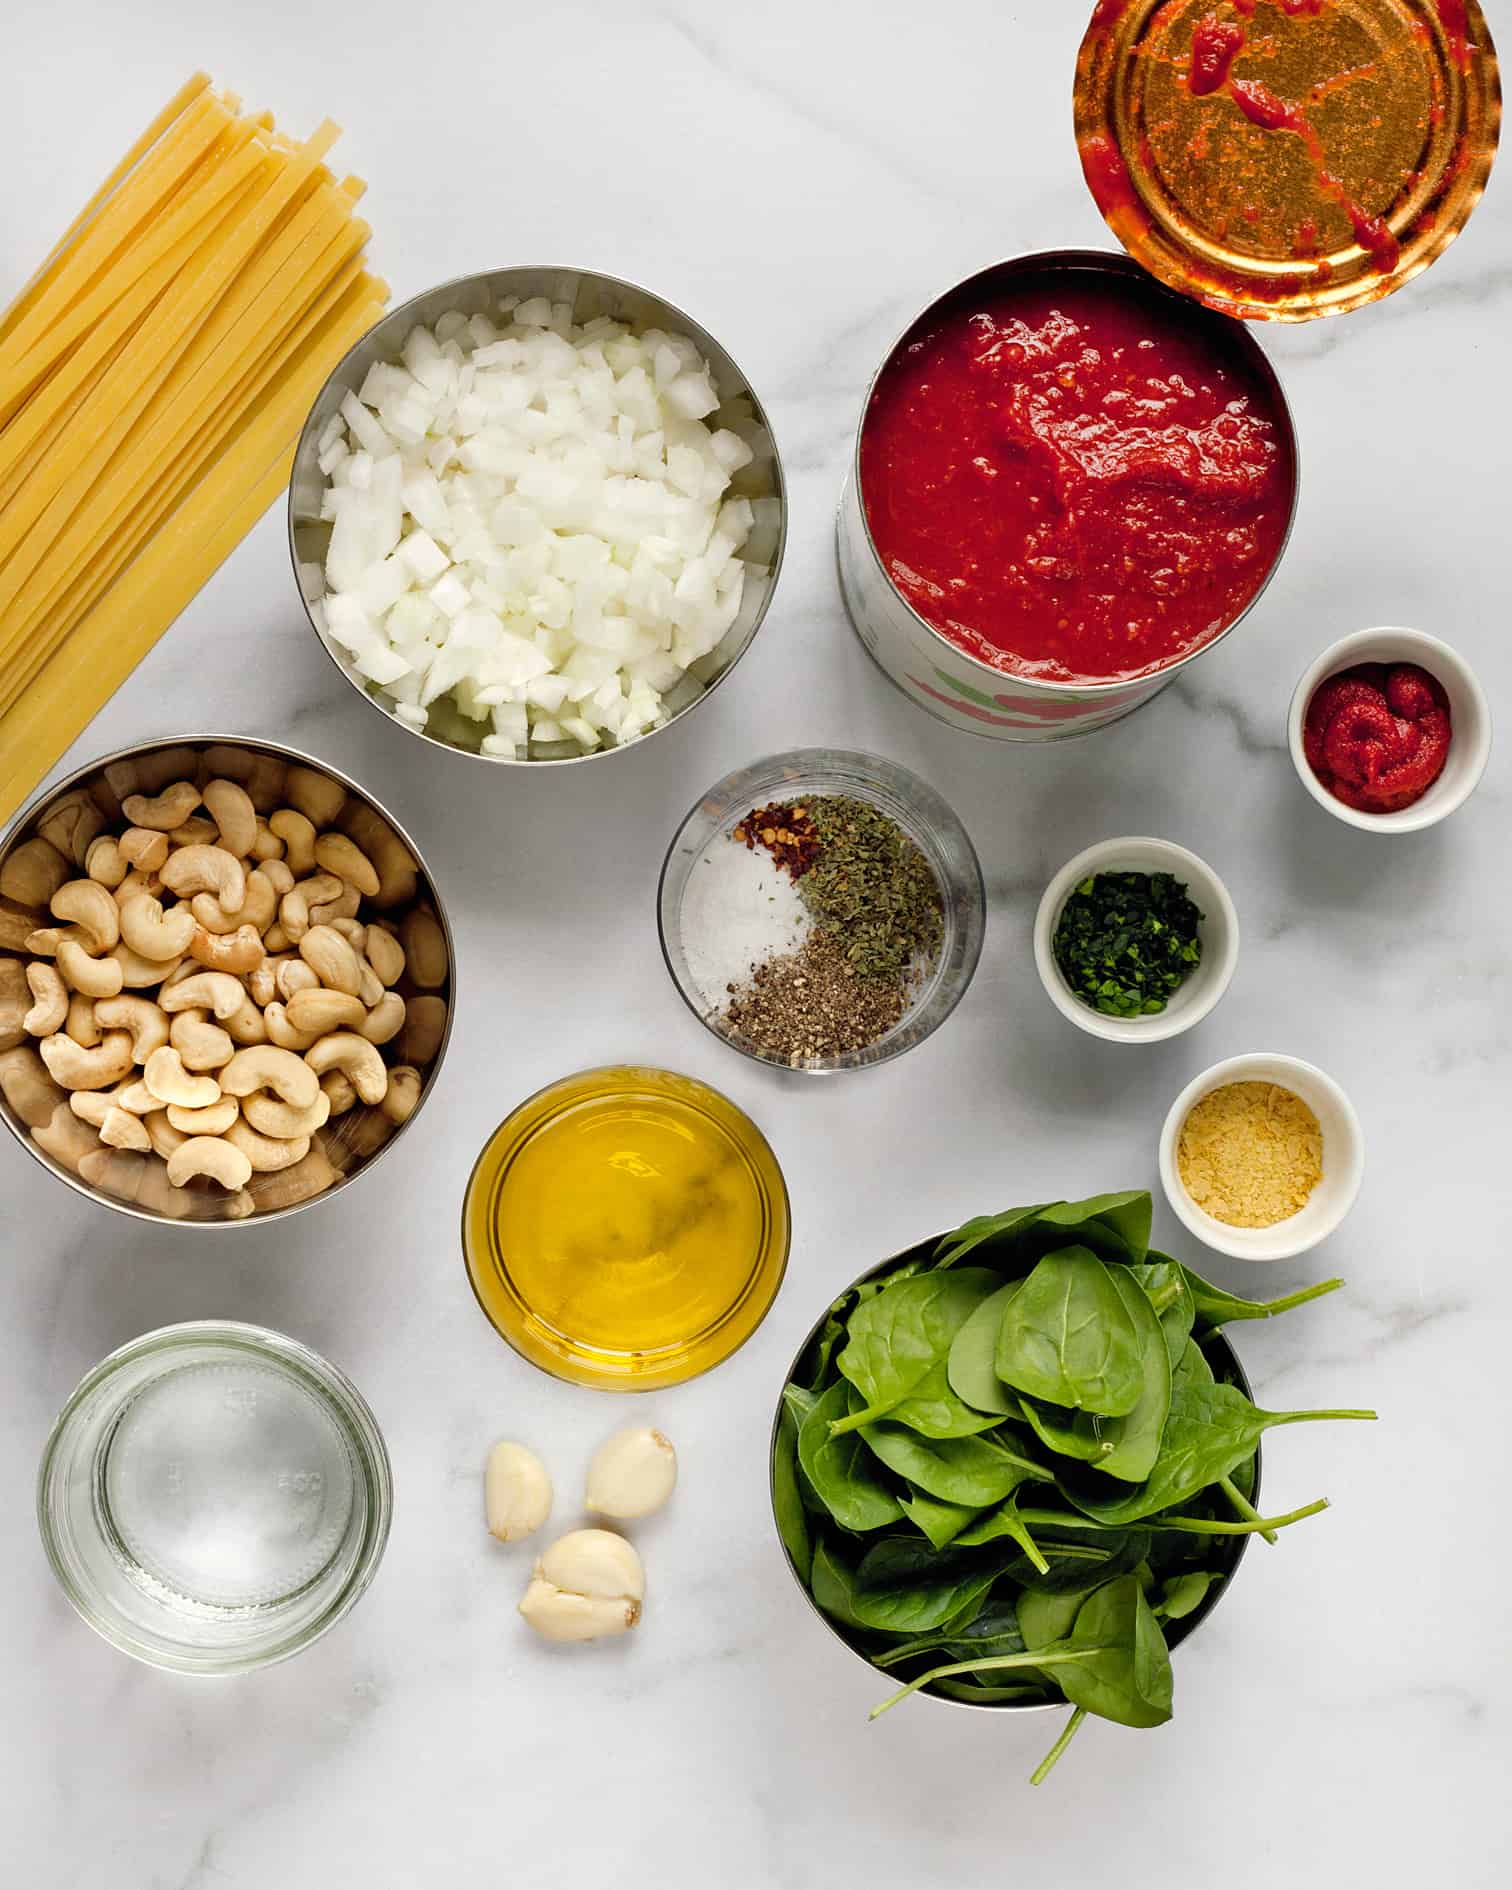 Ingredients for vegan pasta including tomatoes, spinach, garlic, olive oil and cashews